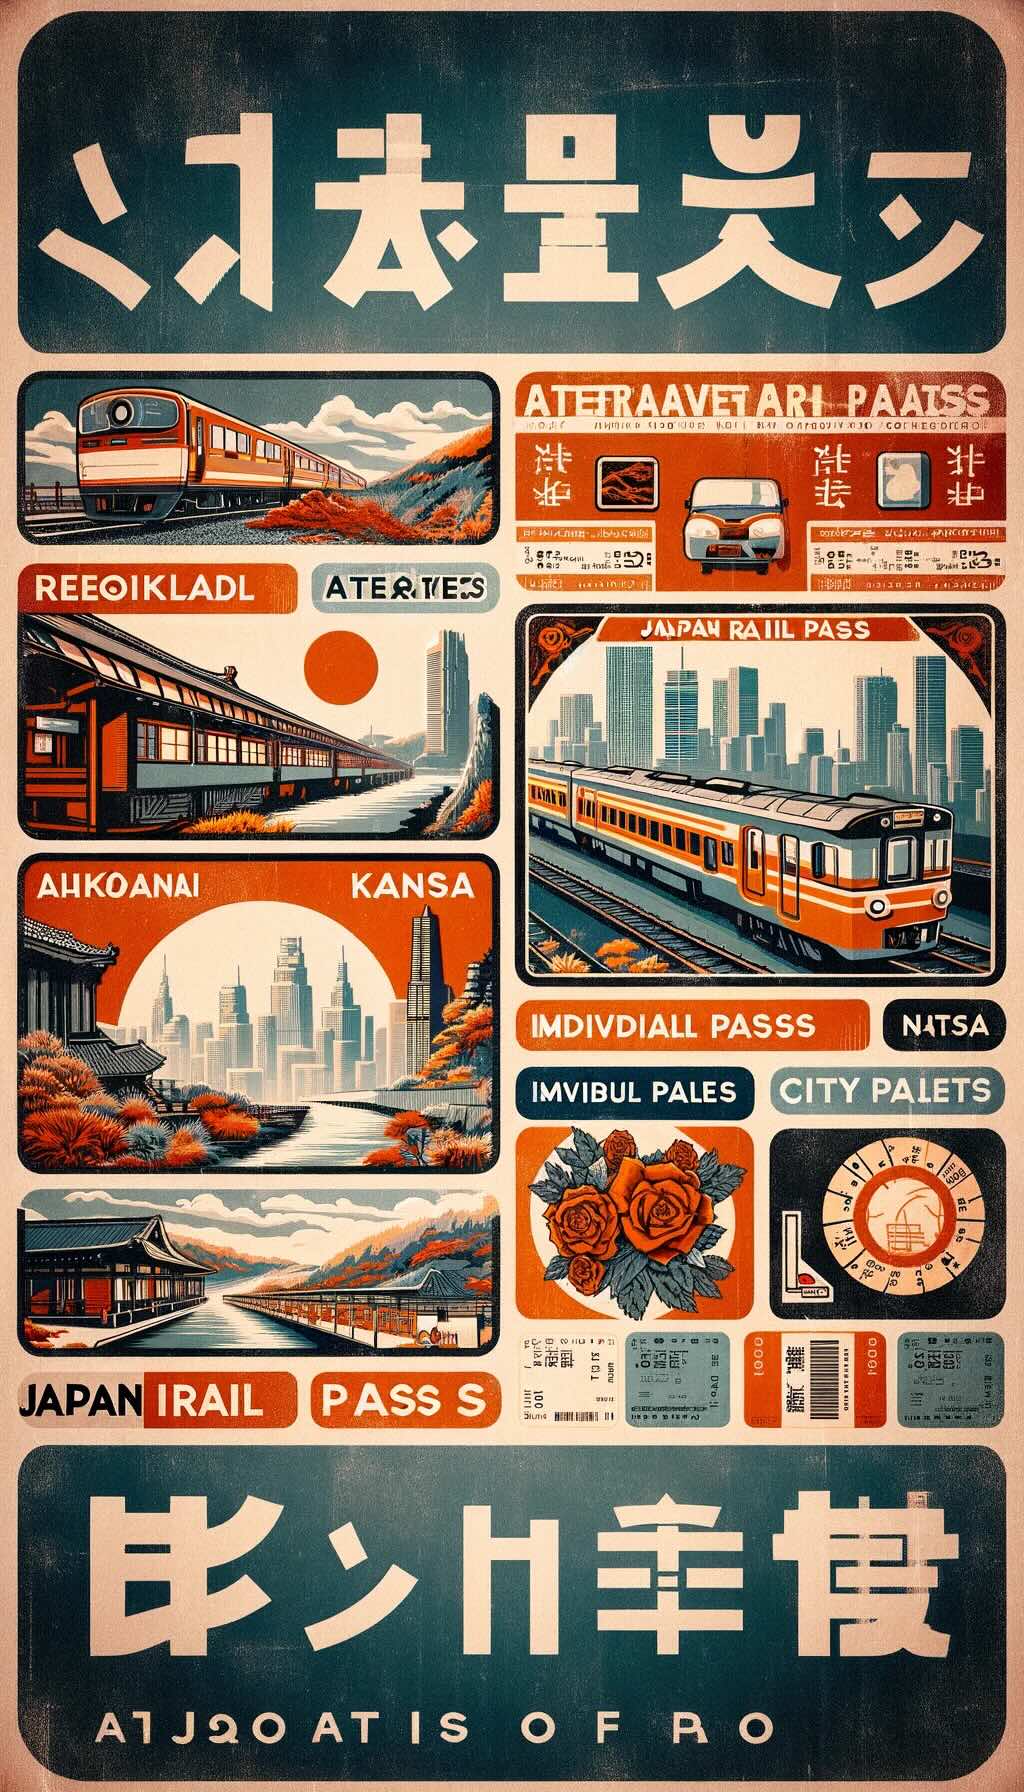 Alternatives to the Japan Rail Pass, highlighting the diversity of travel options available for exploring Japan